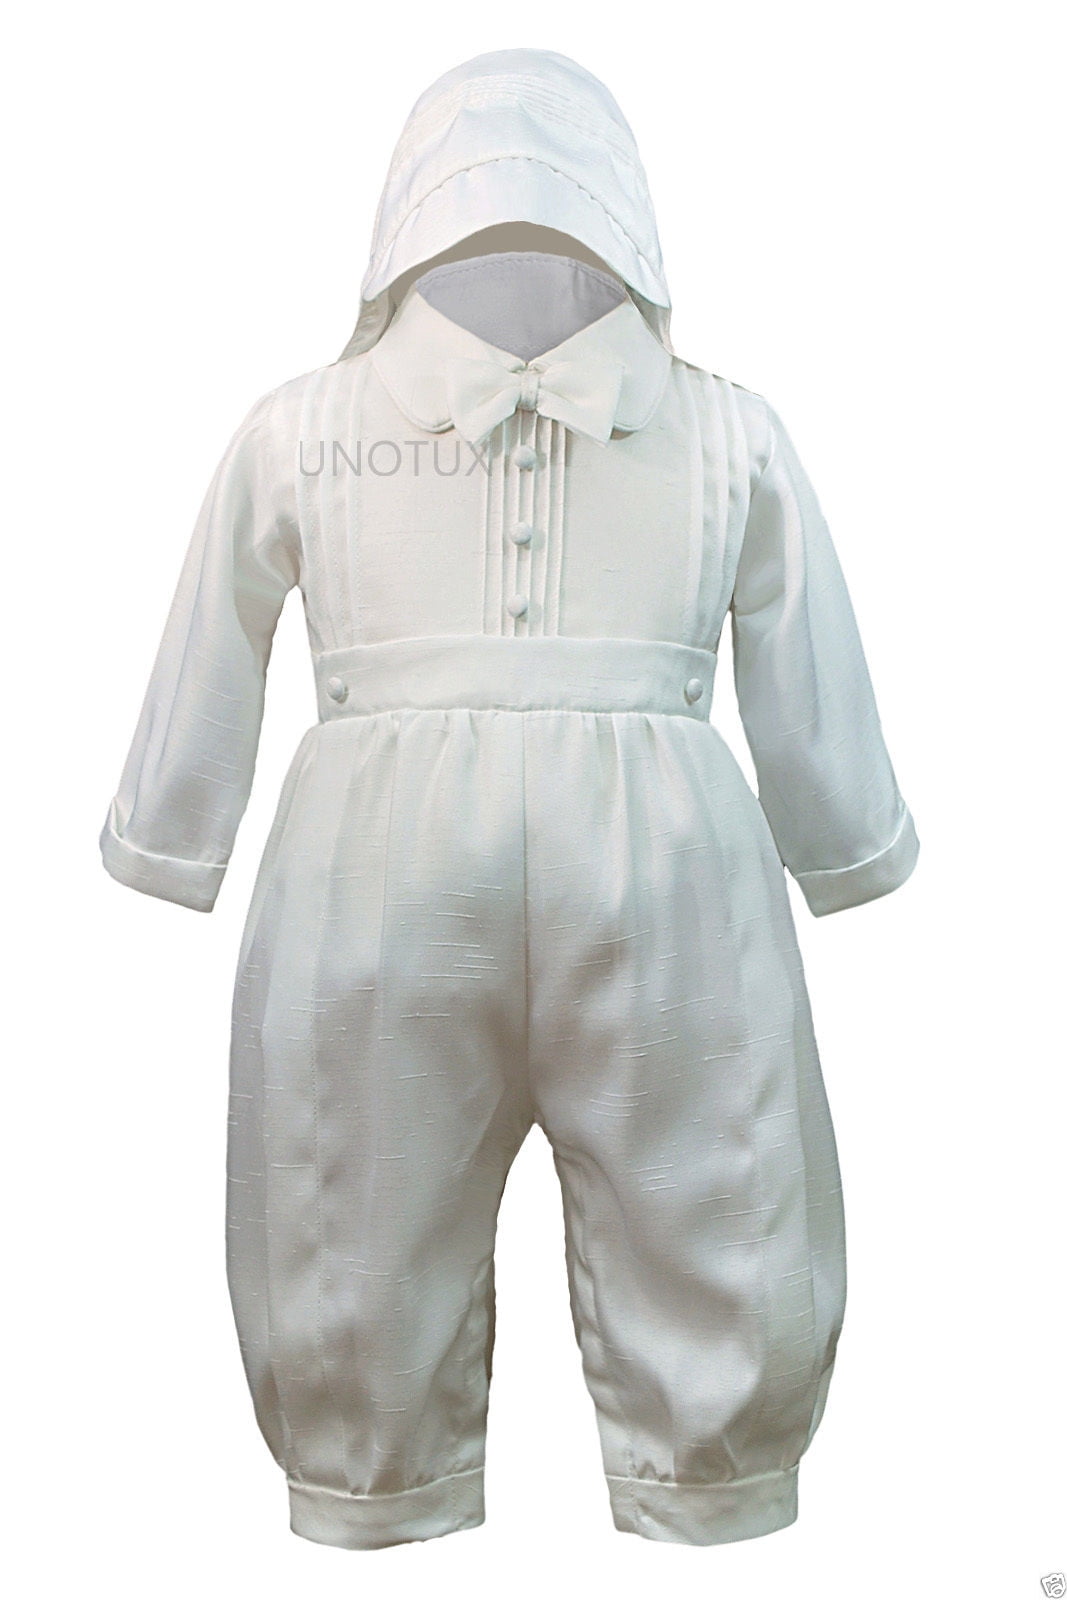 New Baby Boy &Toddler Christening Baptism Gown suit  new born-30M white/silver 